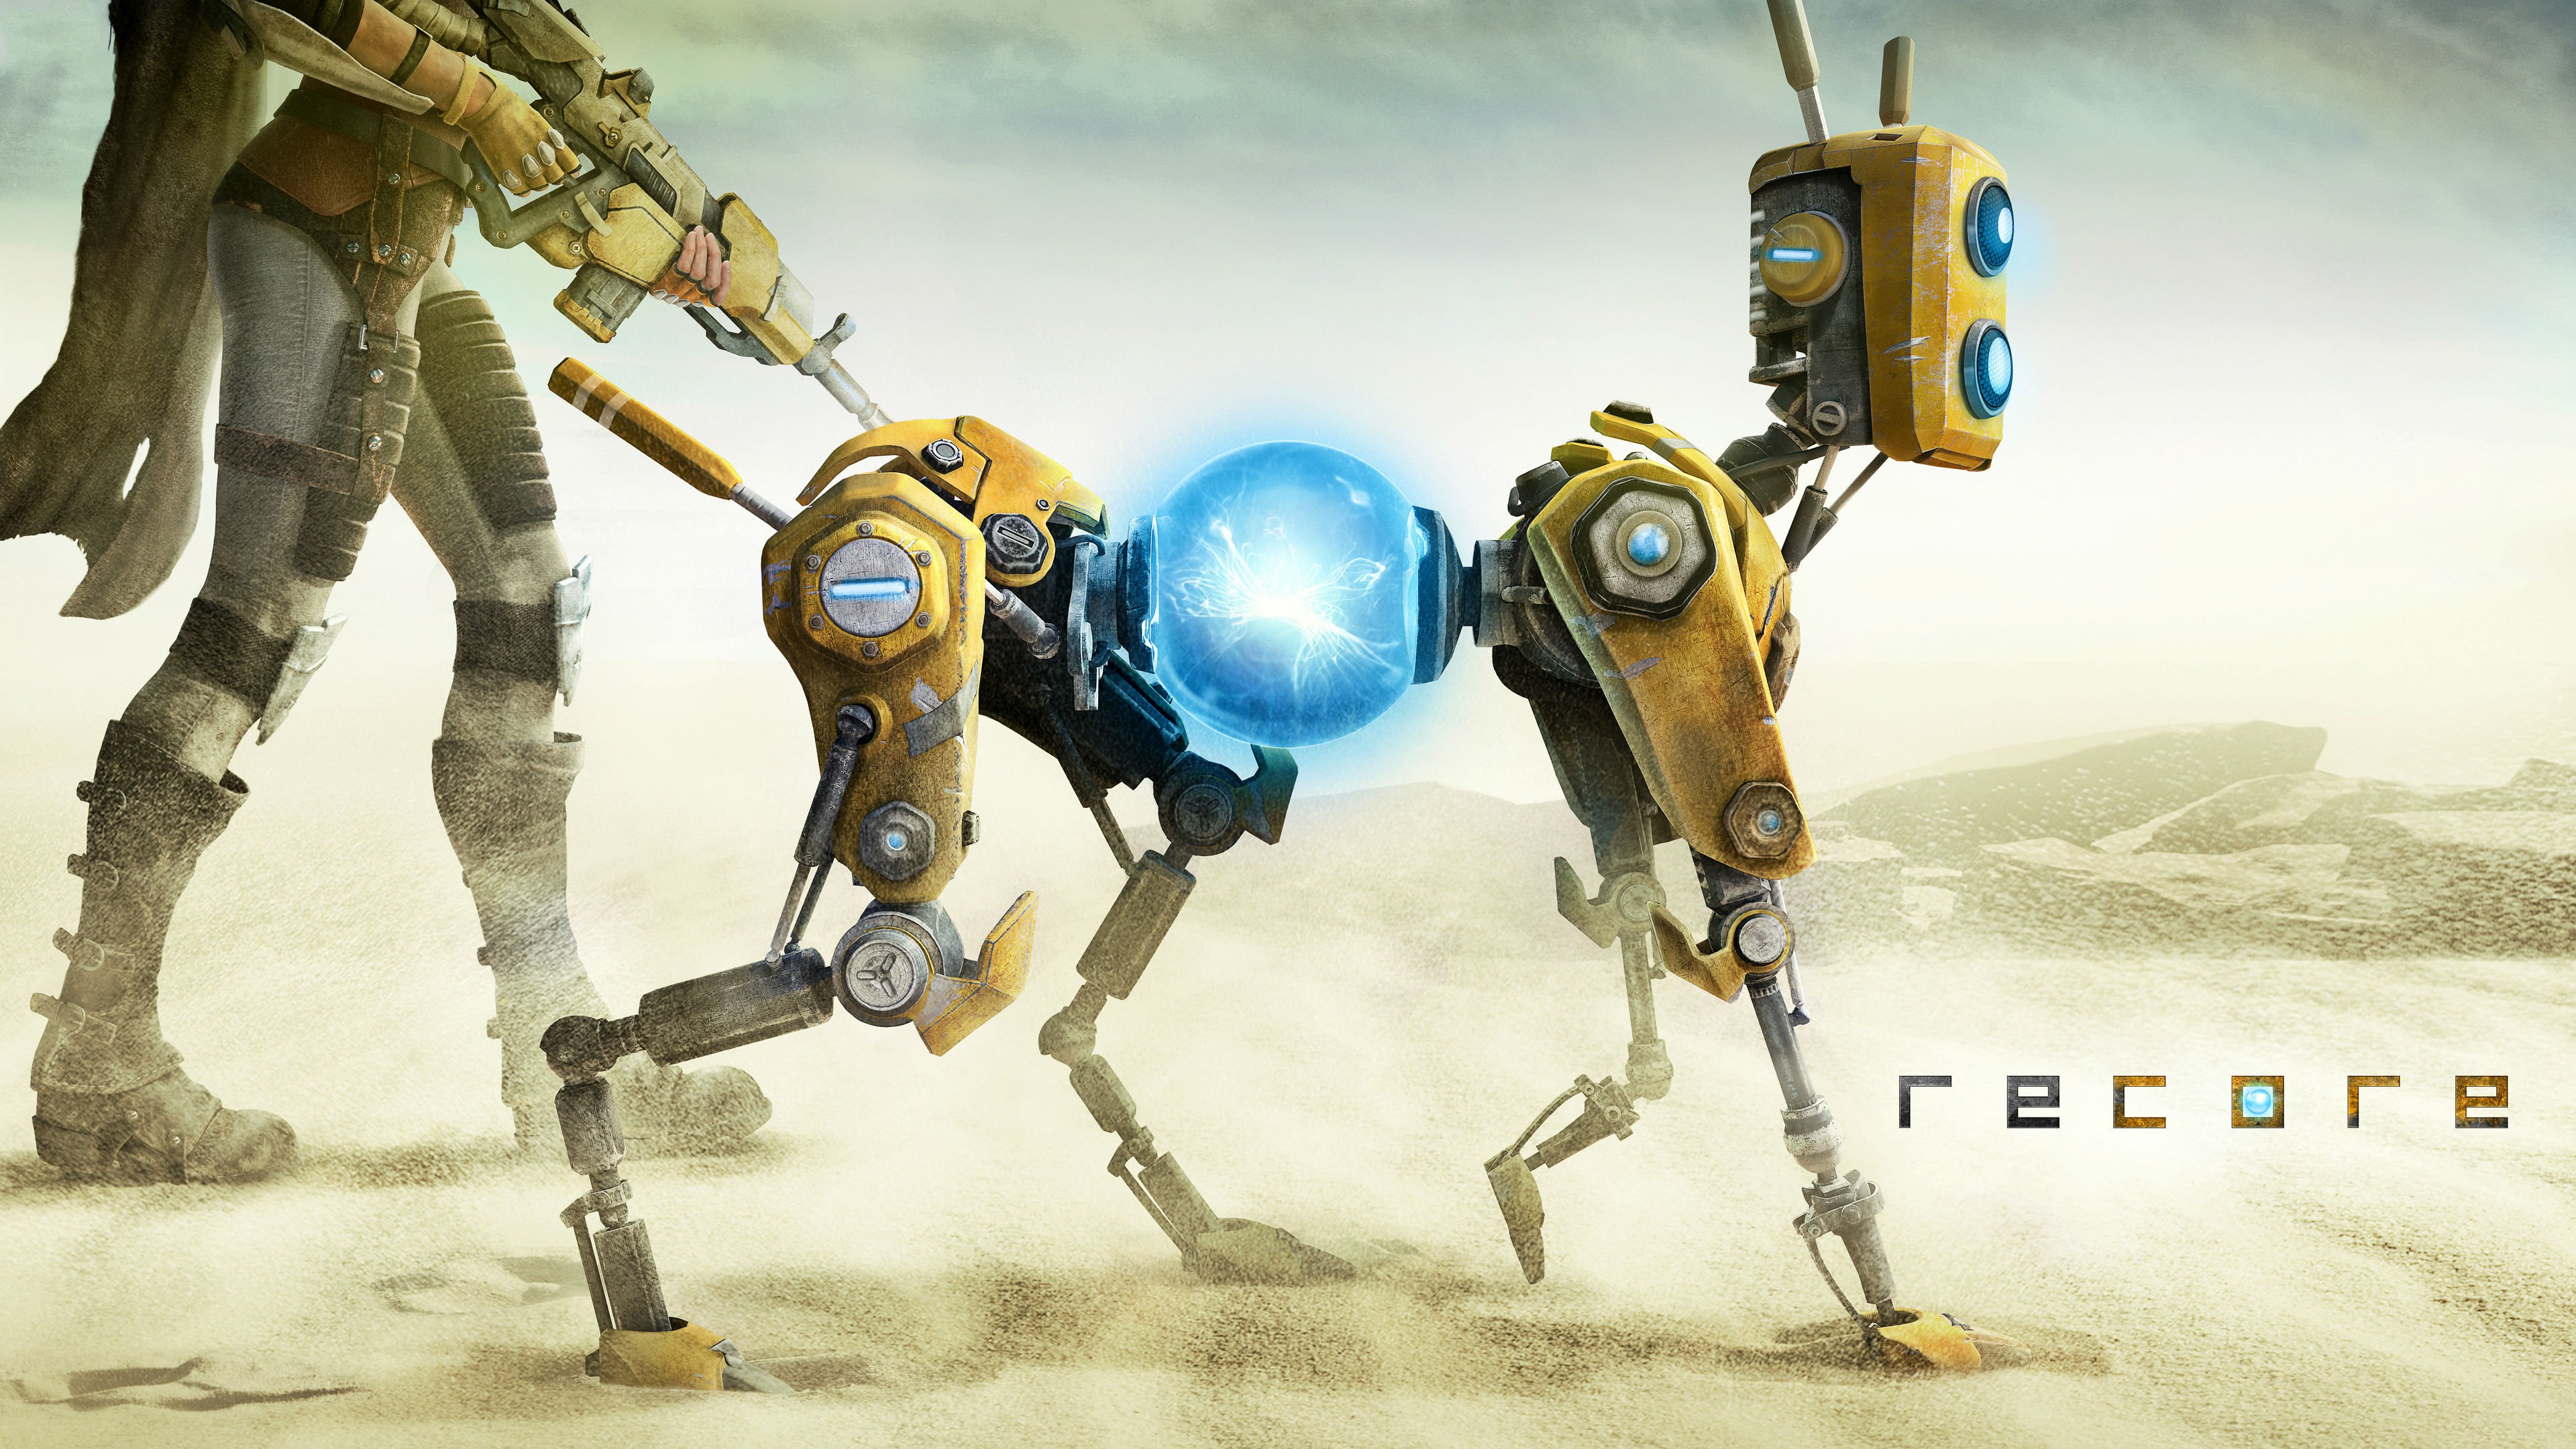 recore, Action, Adventure, Sci fi, Zbox, Futuristic, Robot, Mmo, Rpg, Shooter, Action, Fighting, 1recore, Warrior Wallpaper